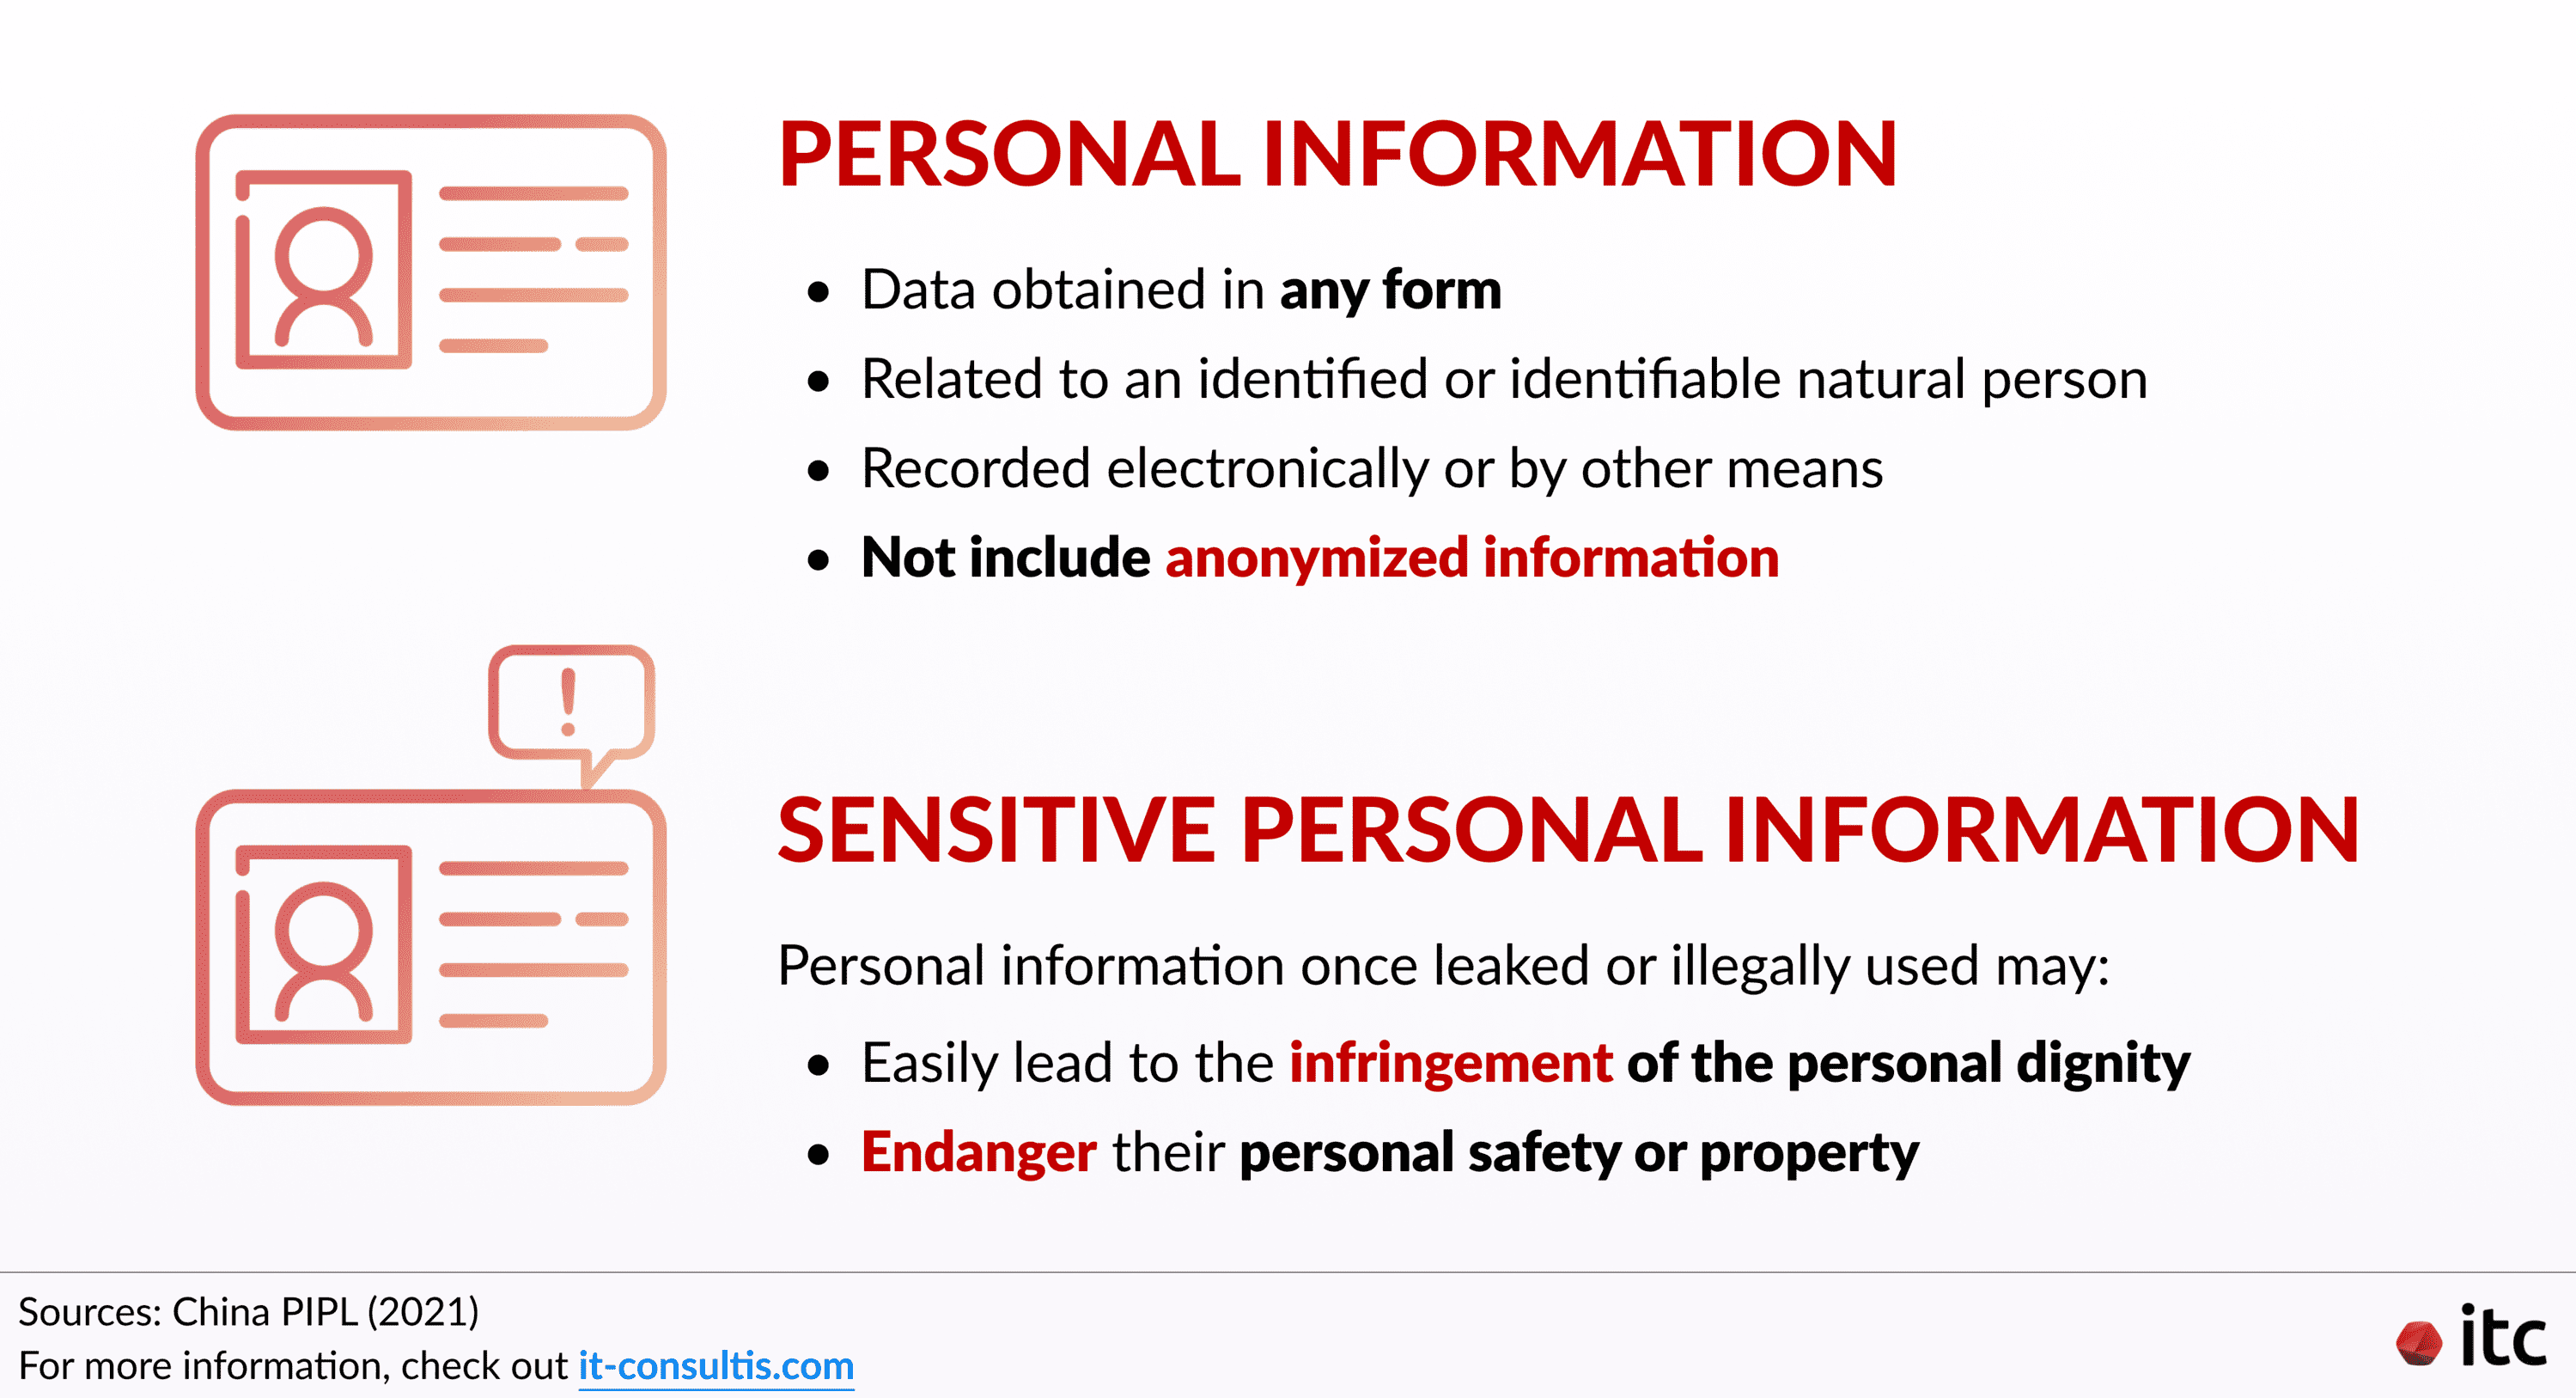 Definitions of Personal Information and Sensitive Personal Information according to the China PIPL